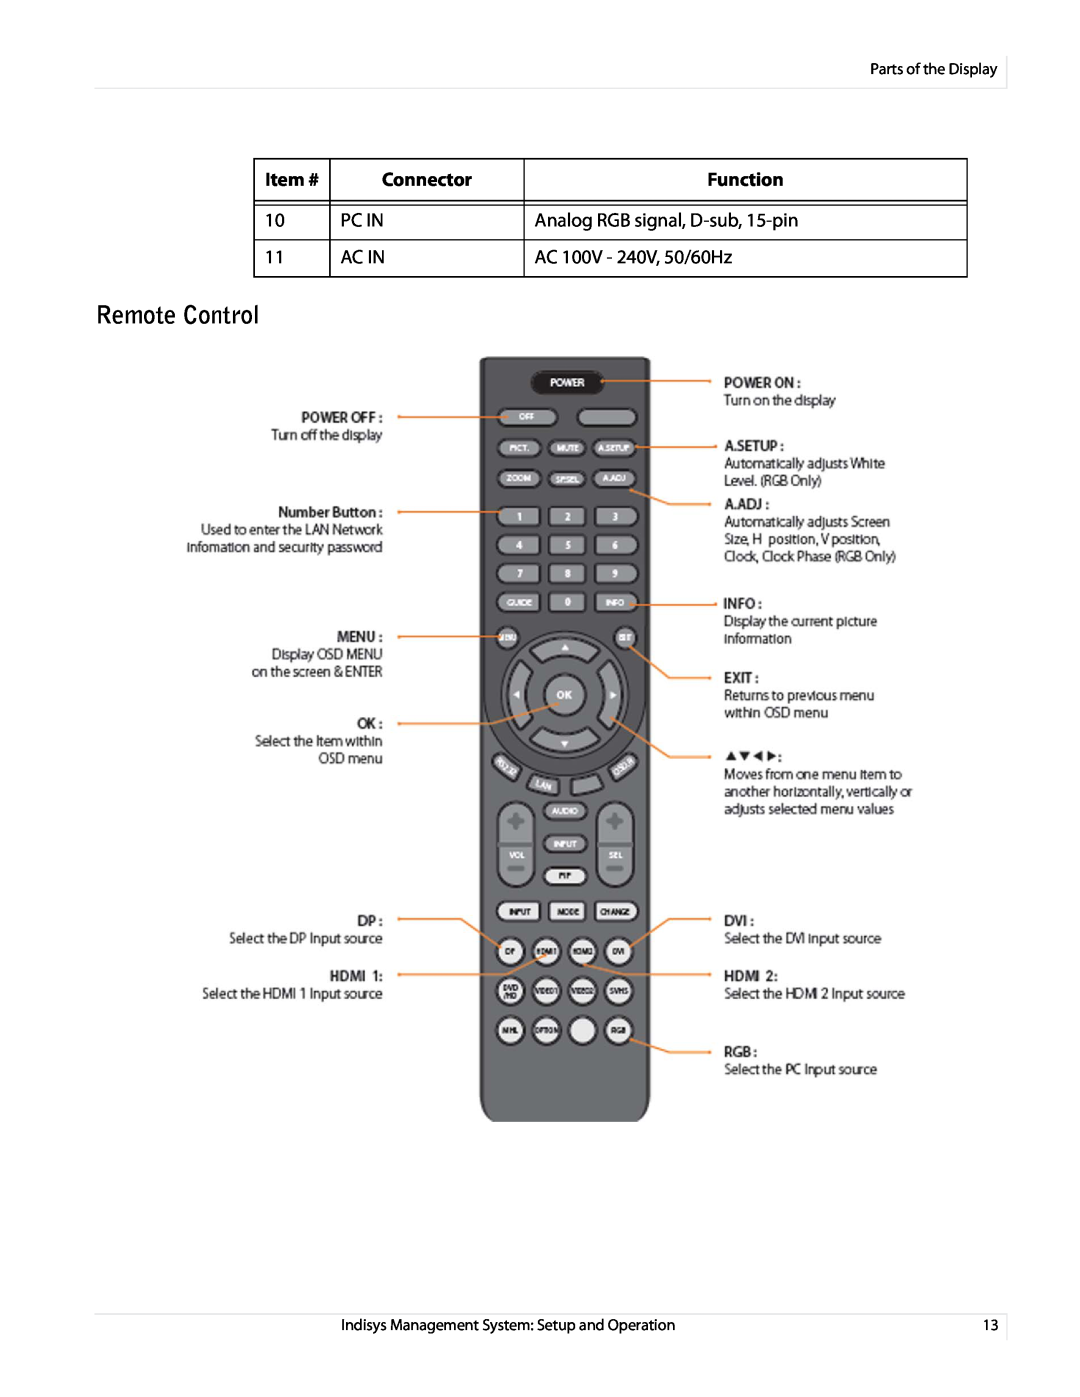 Planar PS5580 manual Remote Control, Item #, Connector, Function, Pc In, Analog RGB signal, D-sub, 15-pin, Ac In 